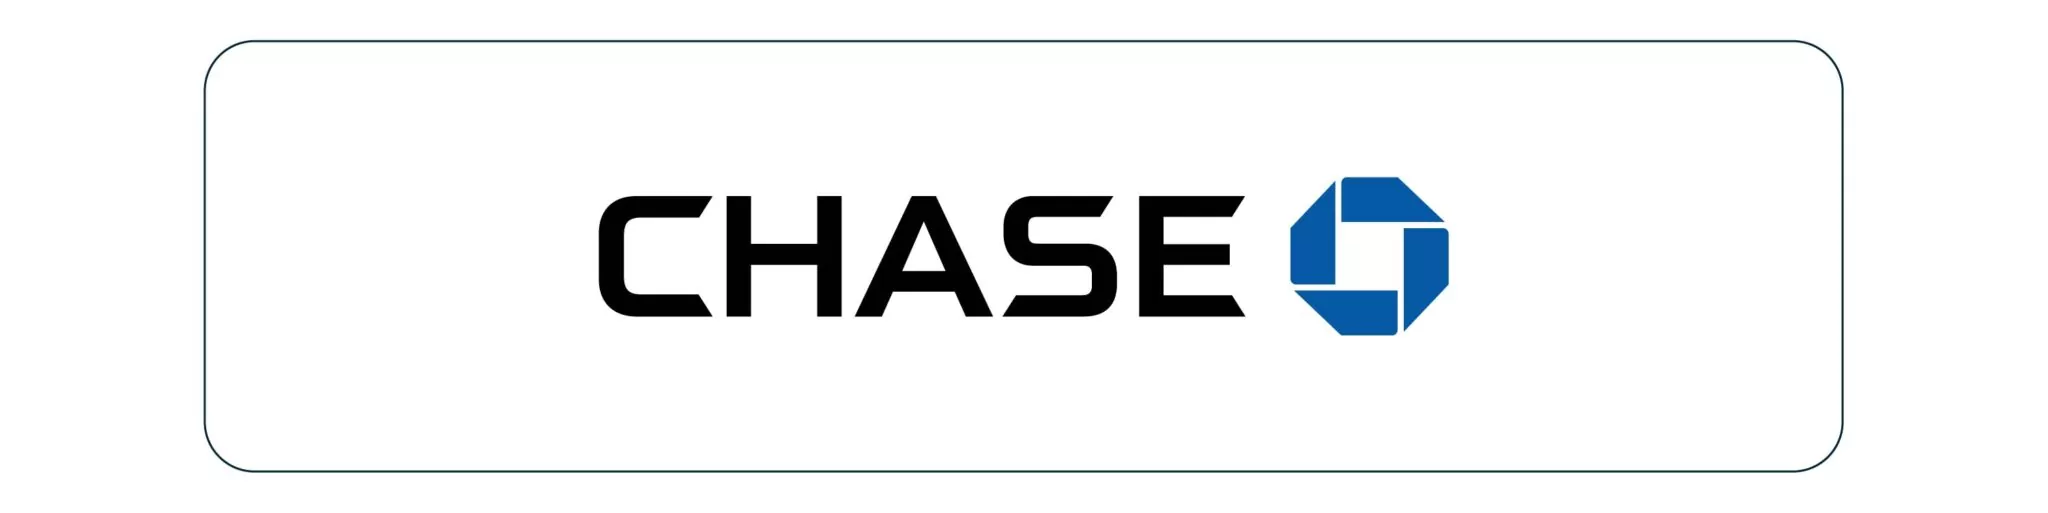 Top 3 Mobile Banking Apps: Chase Mobile